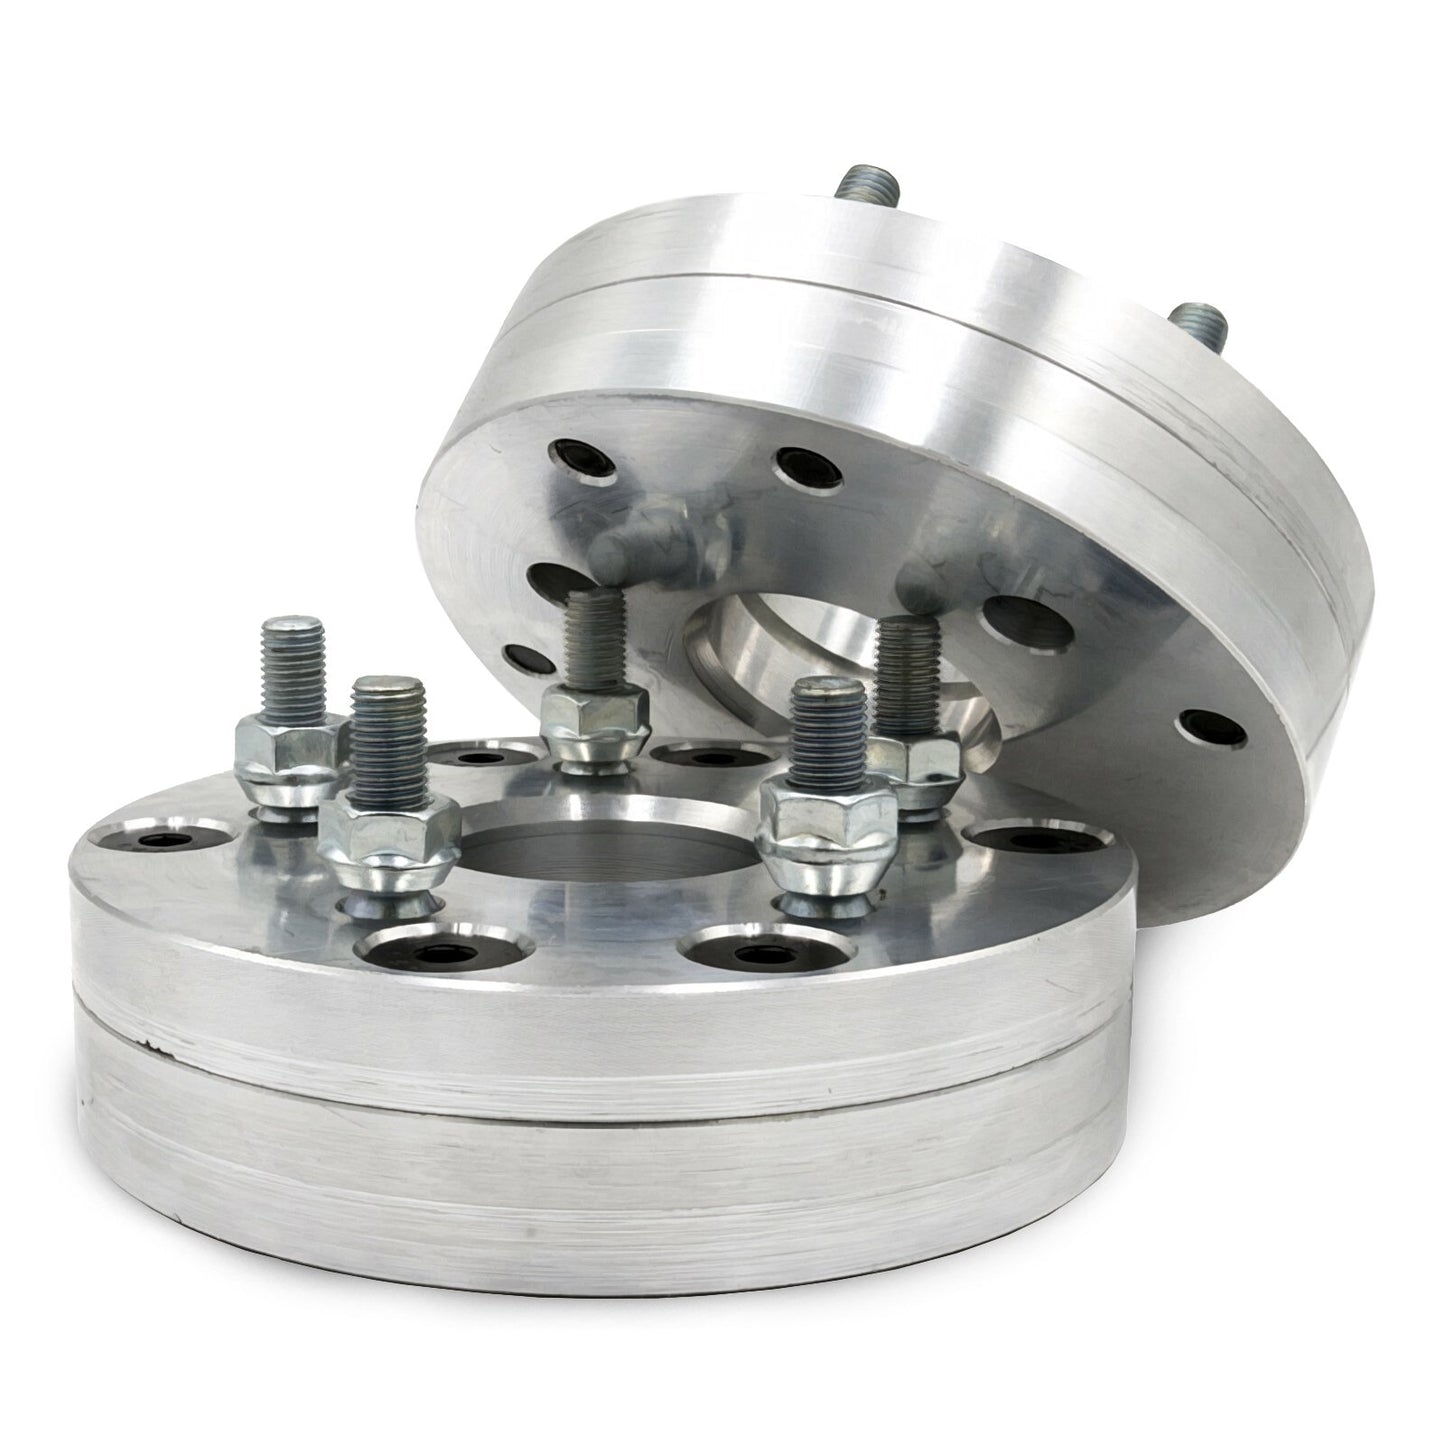 4x130 to 5x112 2 piece Wheel Adapter - Thickness: 1.5" - 3"